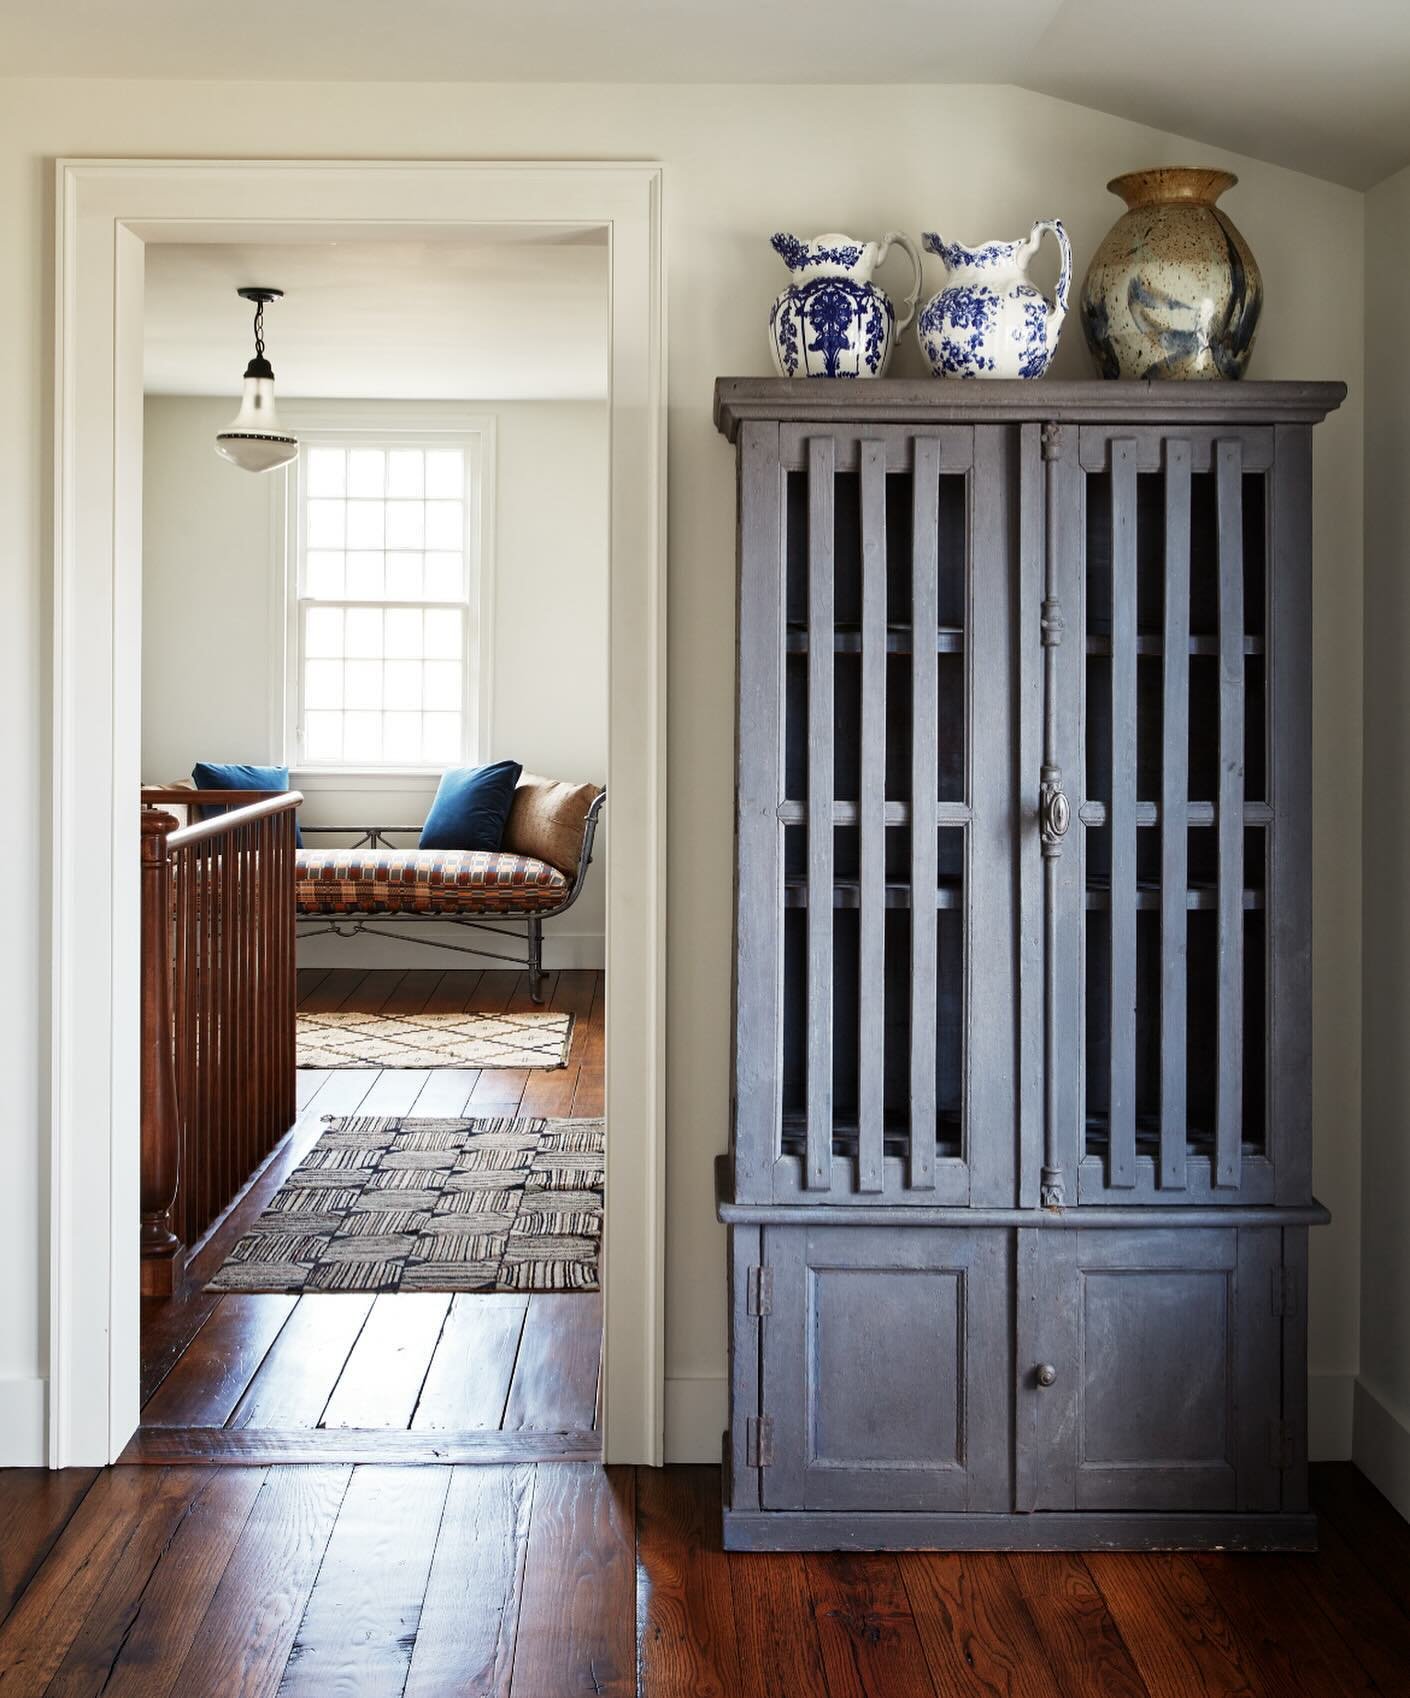 Sightlines&hellip; Second floor landing of this salt box including American hooked rugs, washed paint furniture, English pottery, and Peter Behrens Luzette Pendant. 

📸: Tim Lenz

#peterbehrens #americanhookedrug #washedpaintfurniture #englishpotter